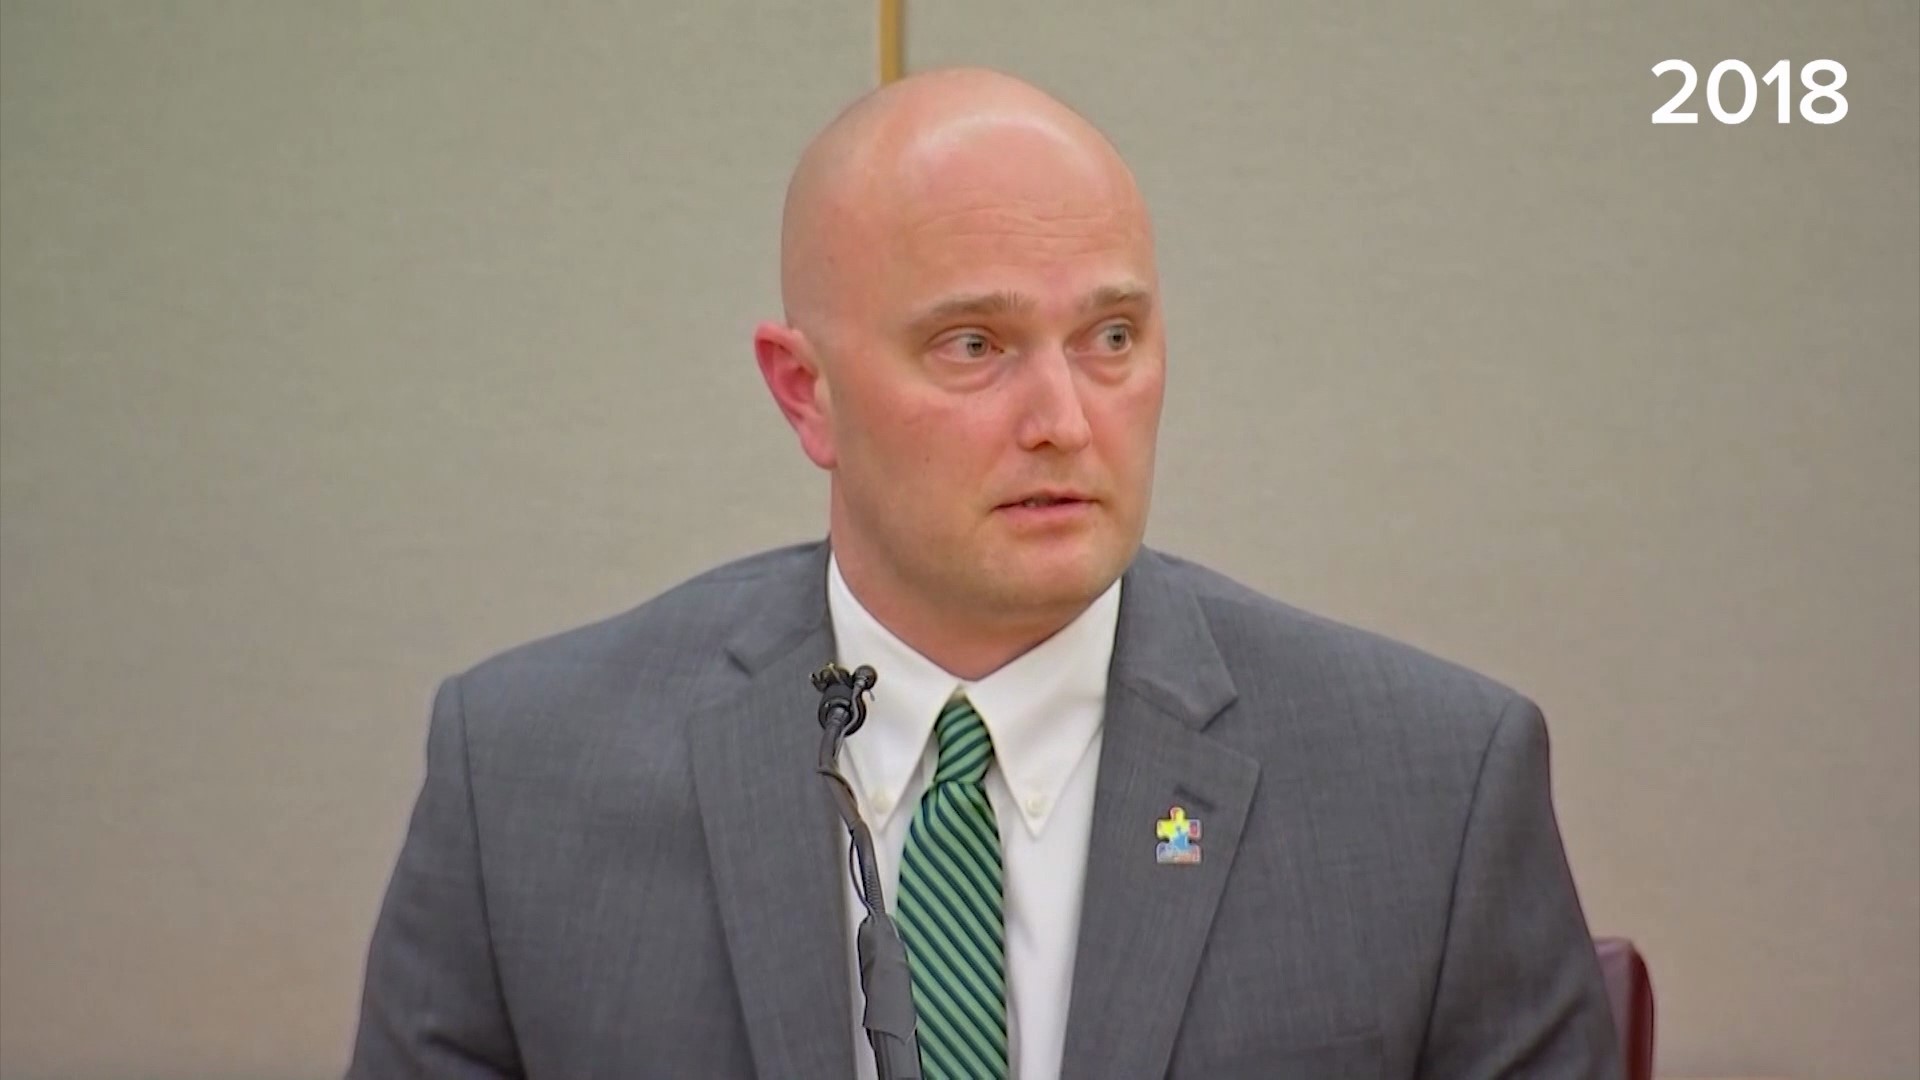 Roy Oliver, a former Balch Springs, Texas, officer, was convicted of murder in the death of Jordan Edwards, 15, in 2018.